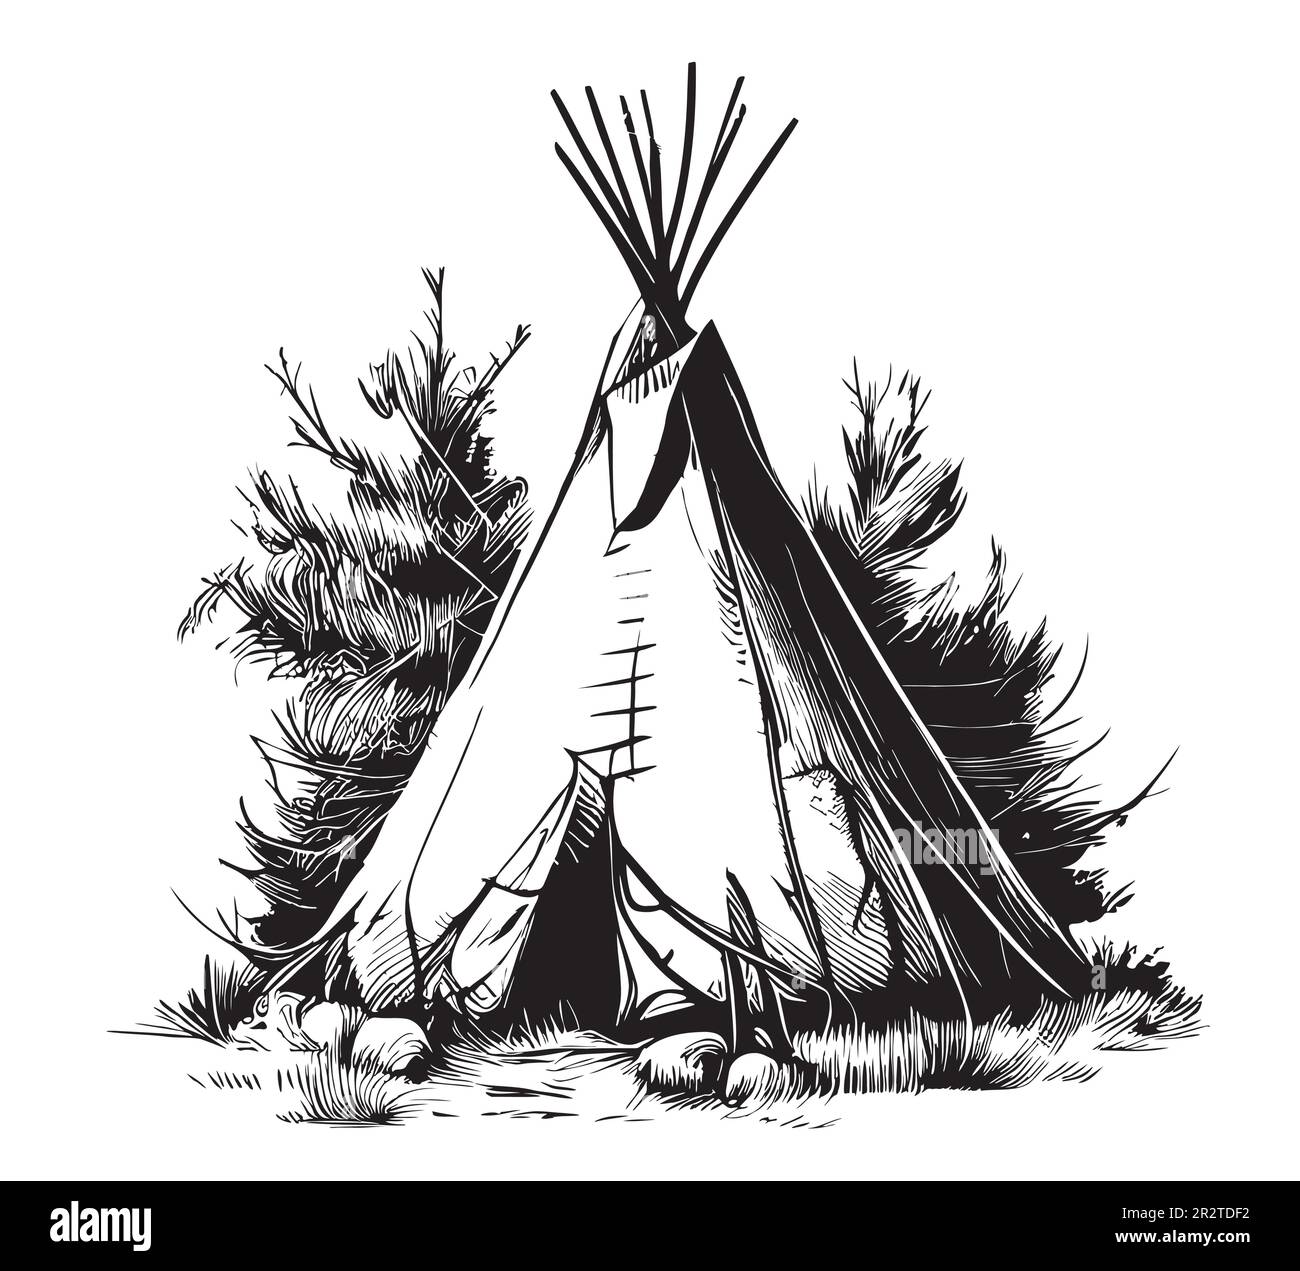 Teepee sketch, hand drawn in doodle style illustration Stock Vector